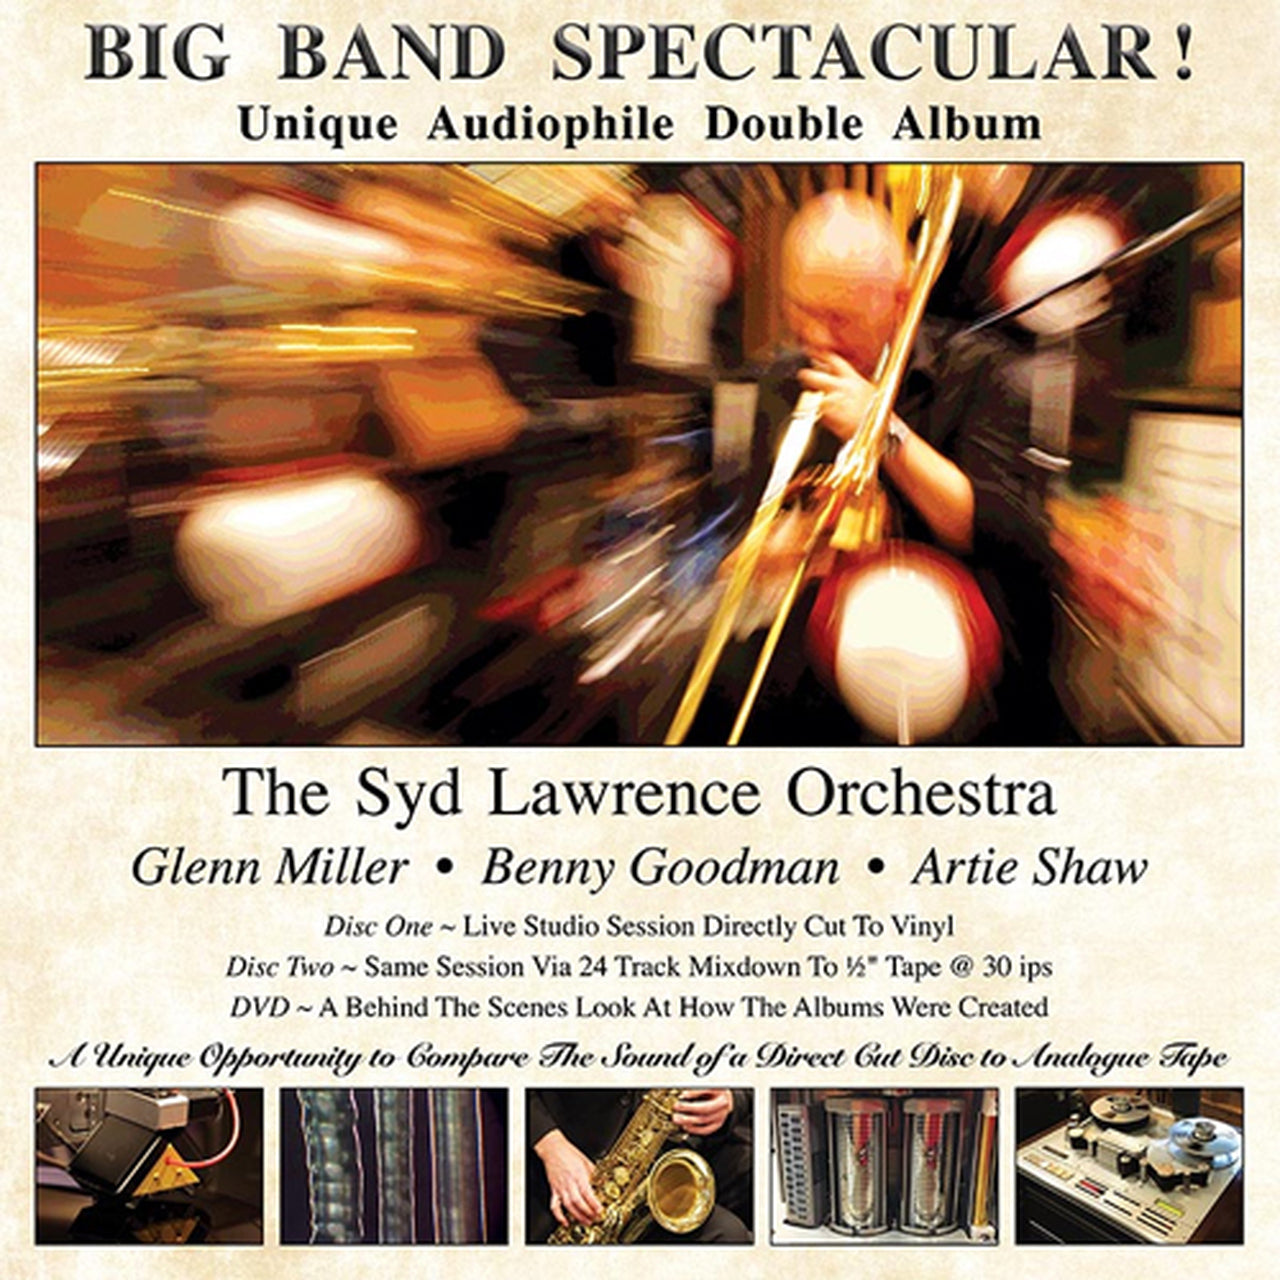 The Syd Lawrence Orchestra | Big Band Spectacular